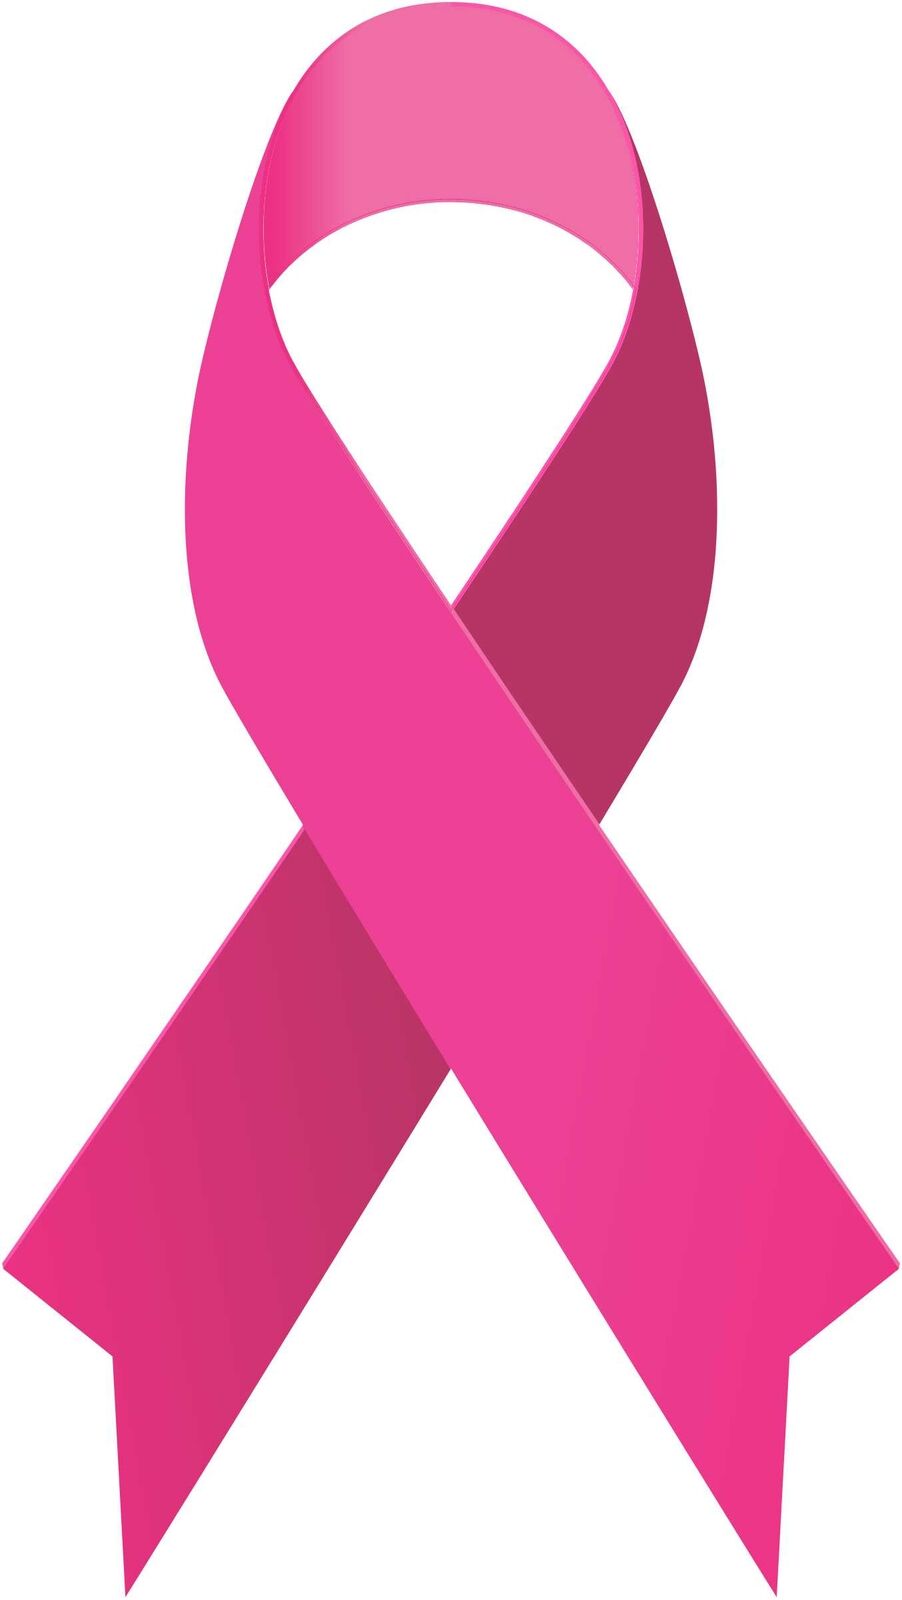 4.5in x 8in Pink Breast Cancer Awareness Ribbon Vinyl Sticker Car Bumper Decal